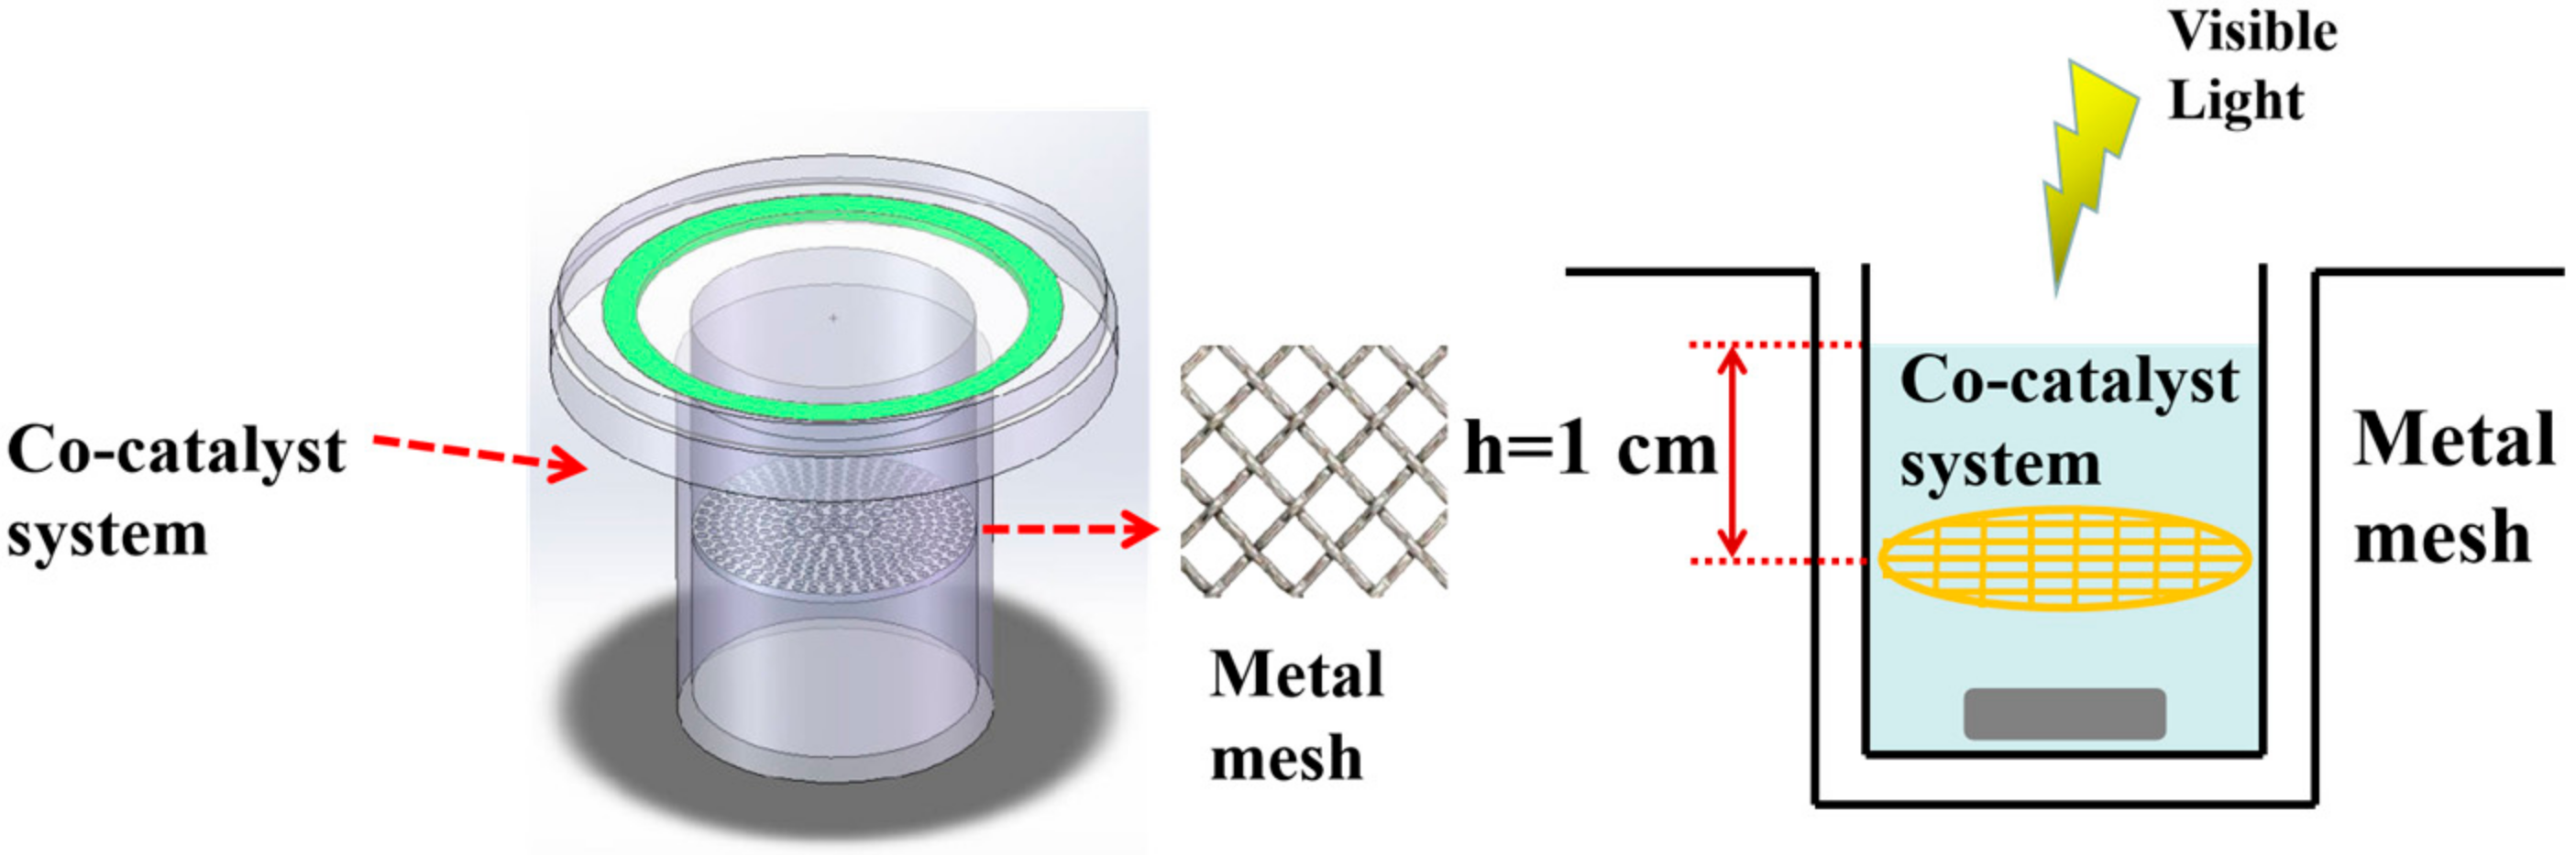 Details of the mesh transition scheme for the 2.5-mm (a) and 0.125-mm